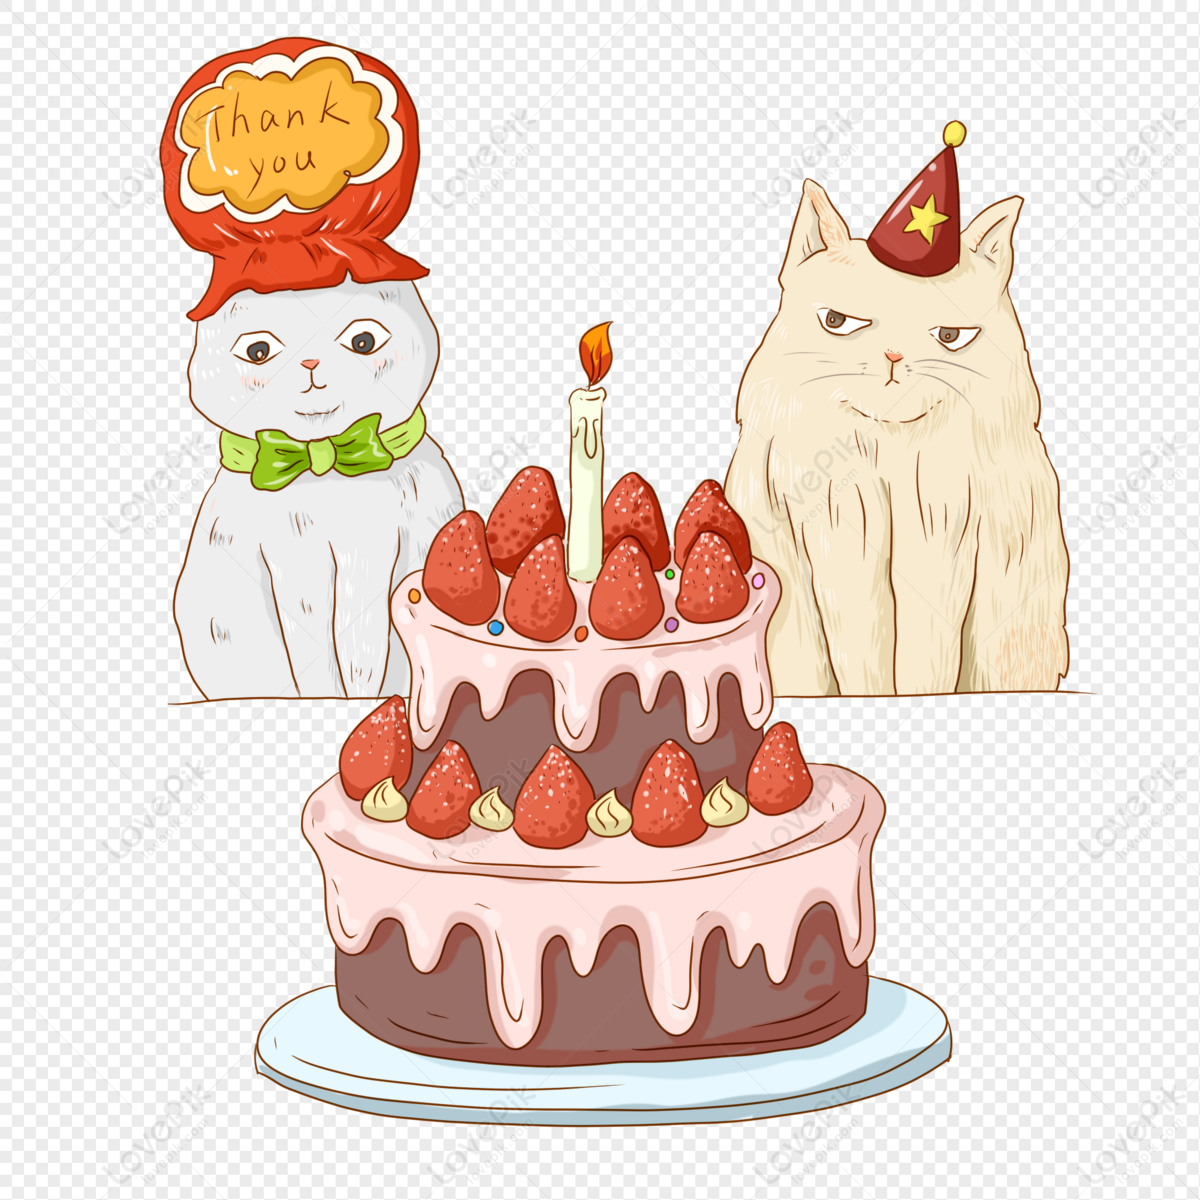 Birthday Cat Free PNG And Clipart Image For Free Download - Lovepik |  401364439